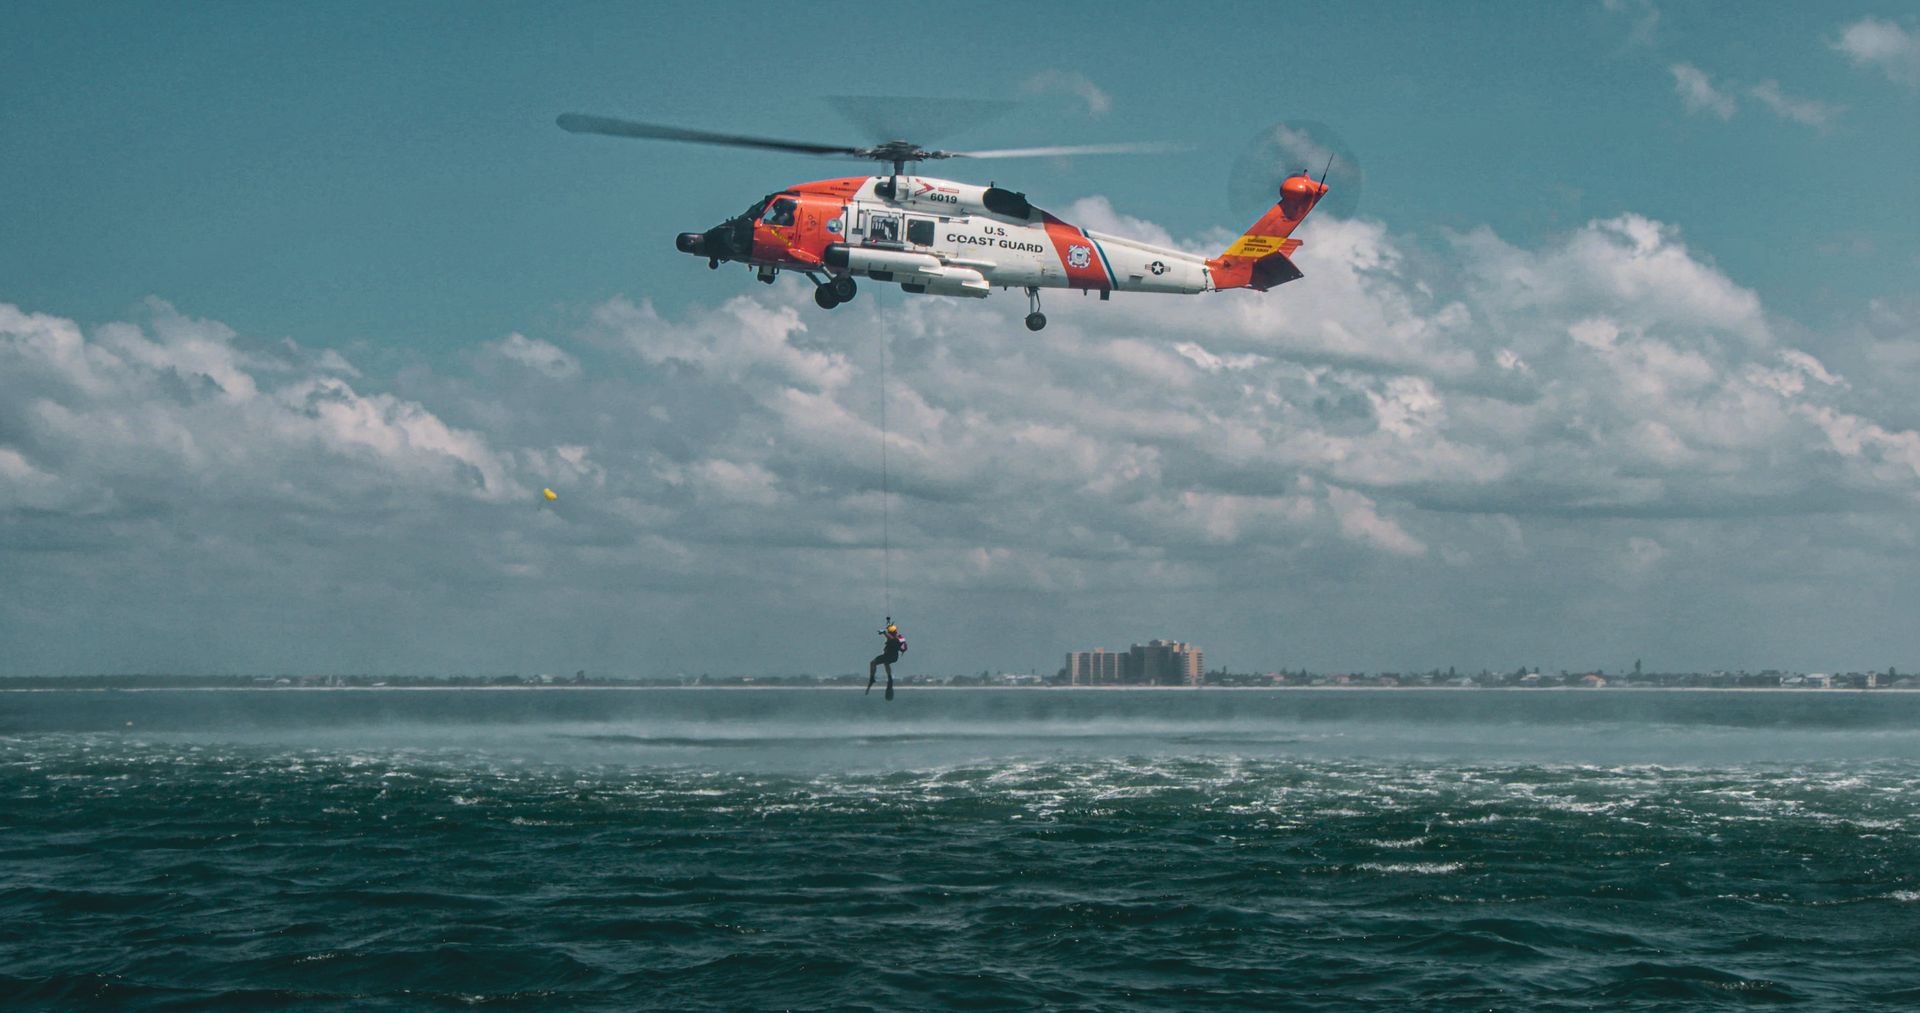 A helicopter is flying over a body of water.